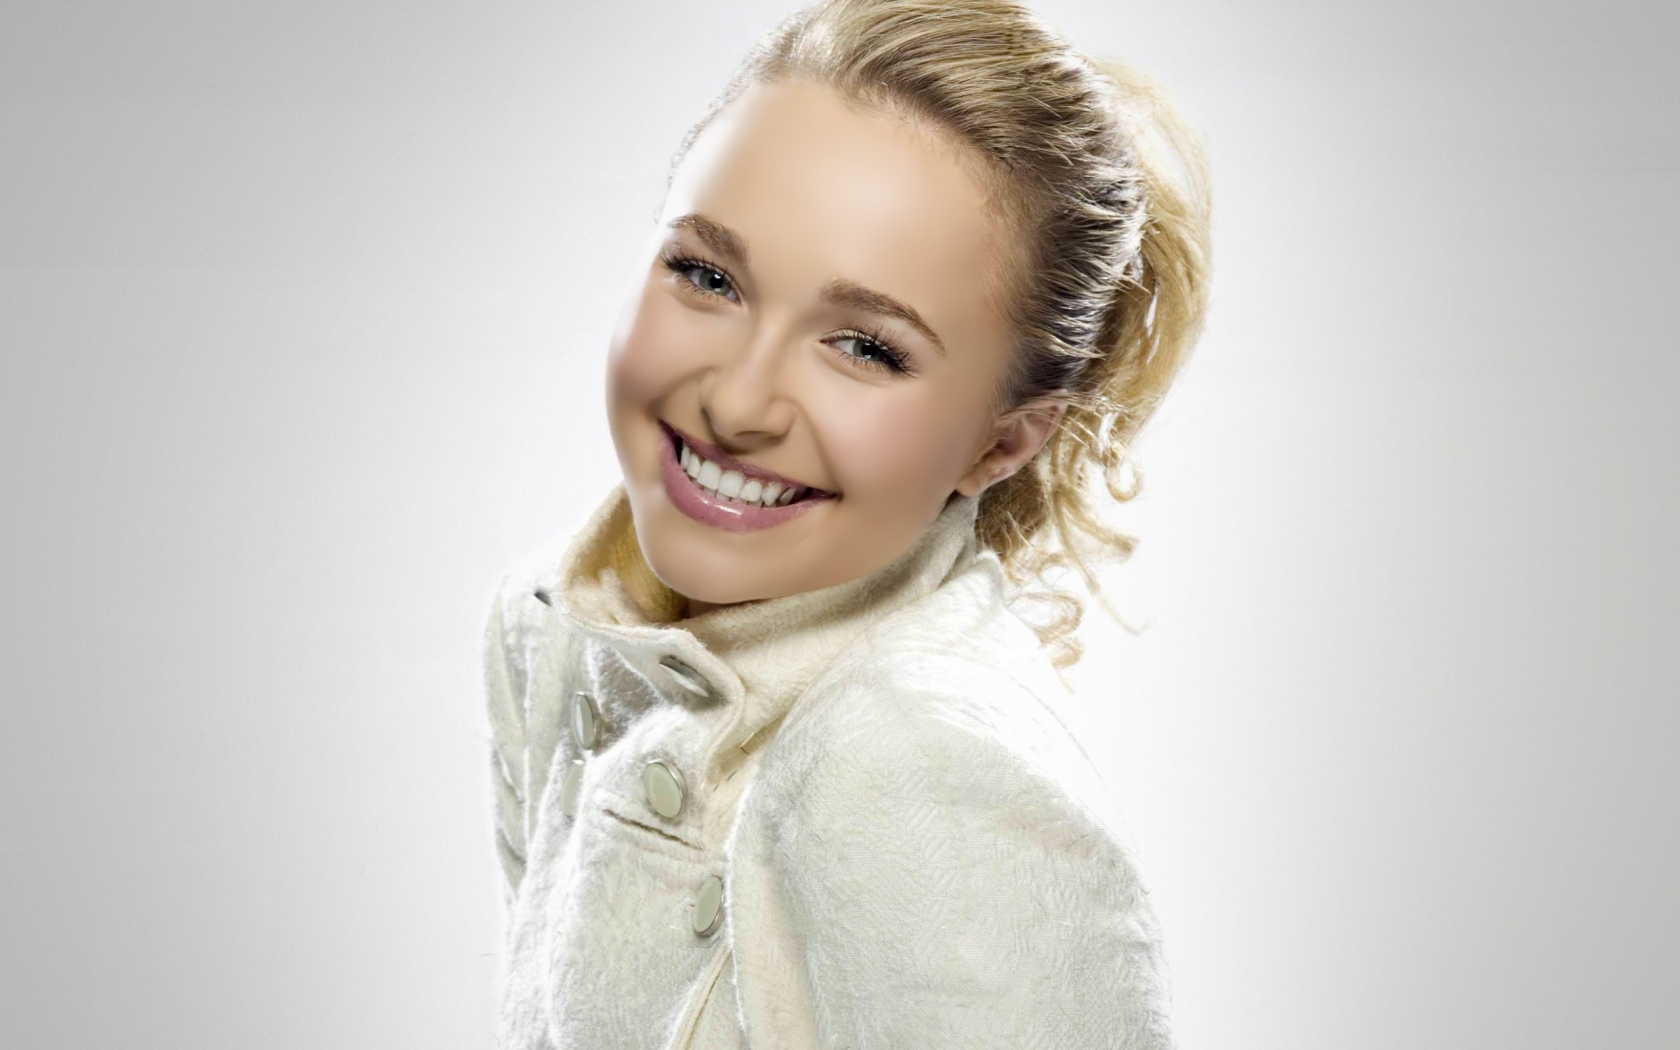 Hayden Panettiere Cute Smile for 1680 x 1050 widescreen resolution